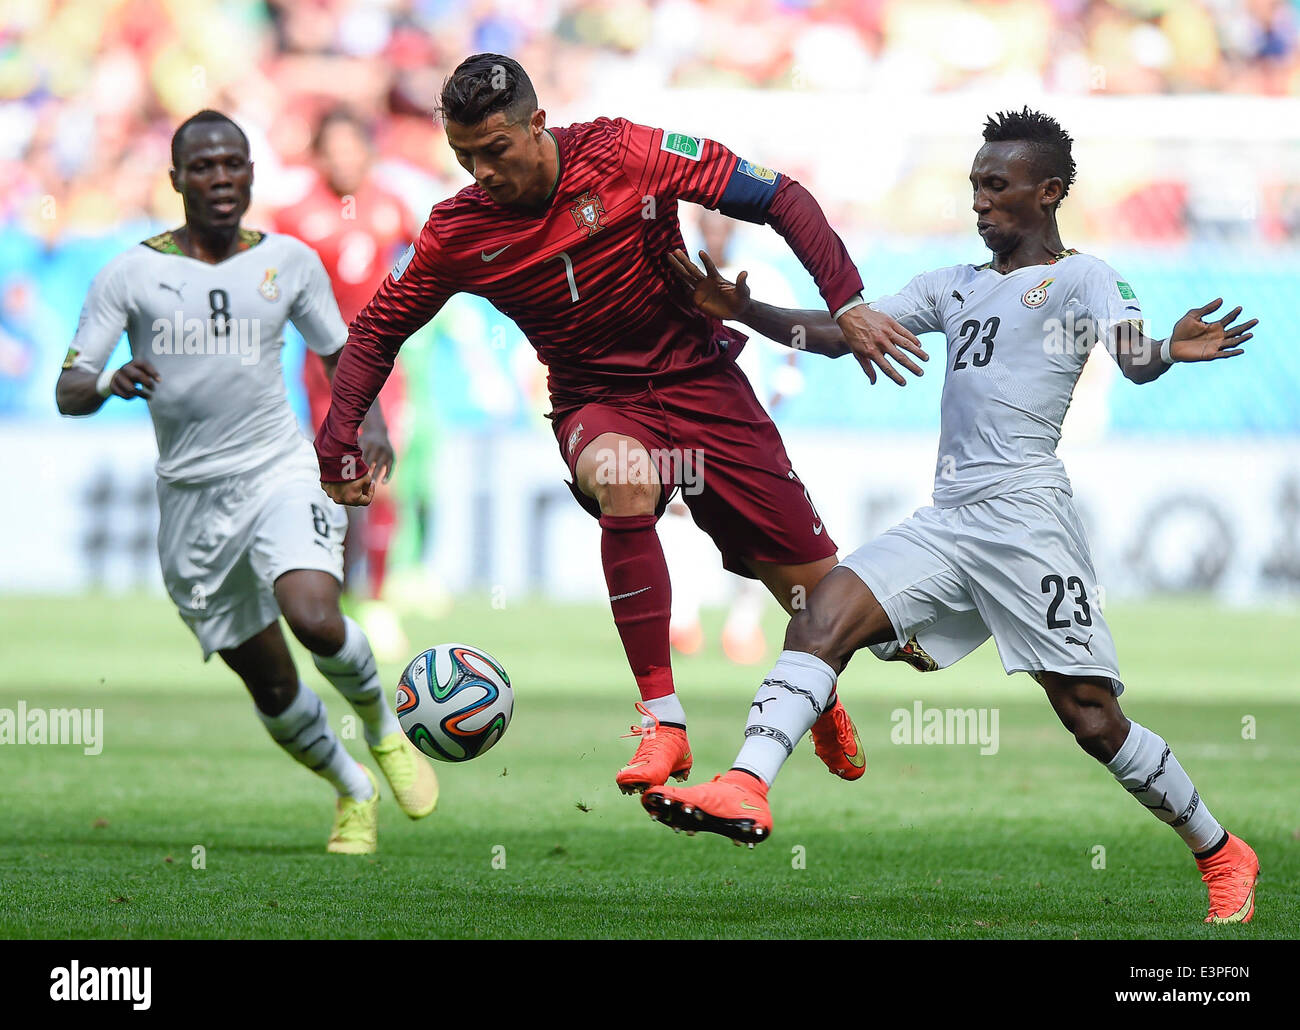 Brasilia, Brazil. 26th June, 2014. Portugal's Cristiano Ronaldo (C) vies with Ghana's Emmanuel Agyemang-Badu (L) and Harrison Afful (R) during a Group G match between Portugal and Ghana of 2014 FIFA World Cup at the Estadio Nacional Stadium in Brasilia, Brazil, June 26, 2014. Portugal won 2-1 over Ghana on Thursday. © Qi Heng/Xinhua/Alamy Live News Stock Photo